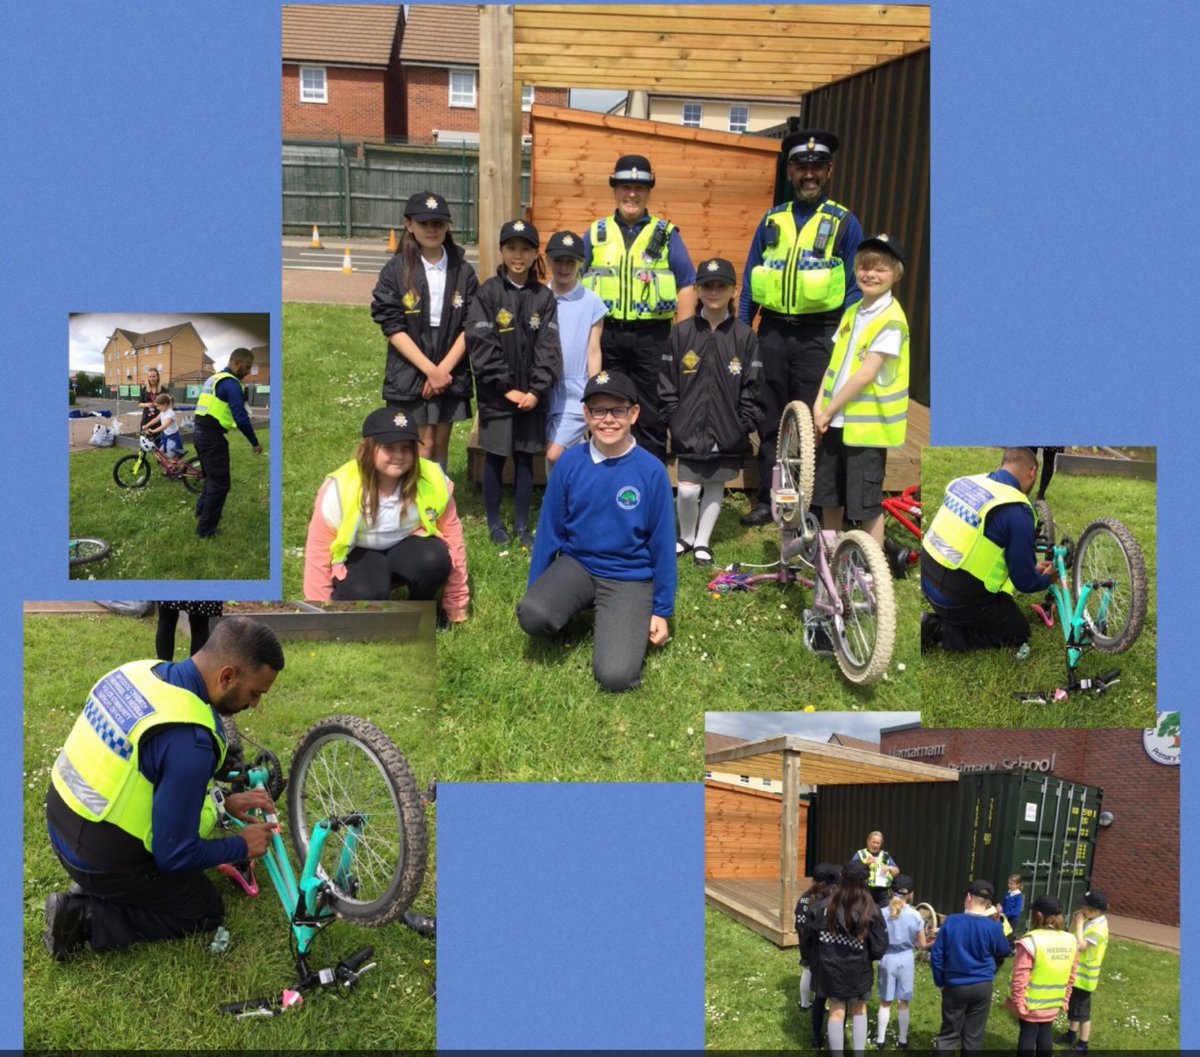 CSOs Read and Seedat have been @LlantarnamCP Security marking bikes. We also had the pleasure of a visit from the Heddlu Bach @GPNxtGen #bikeregister #protectyourbike #reducingcrime